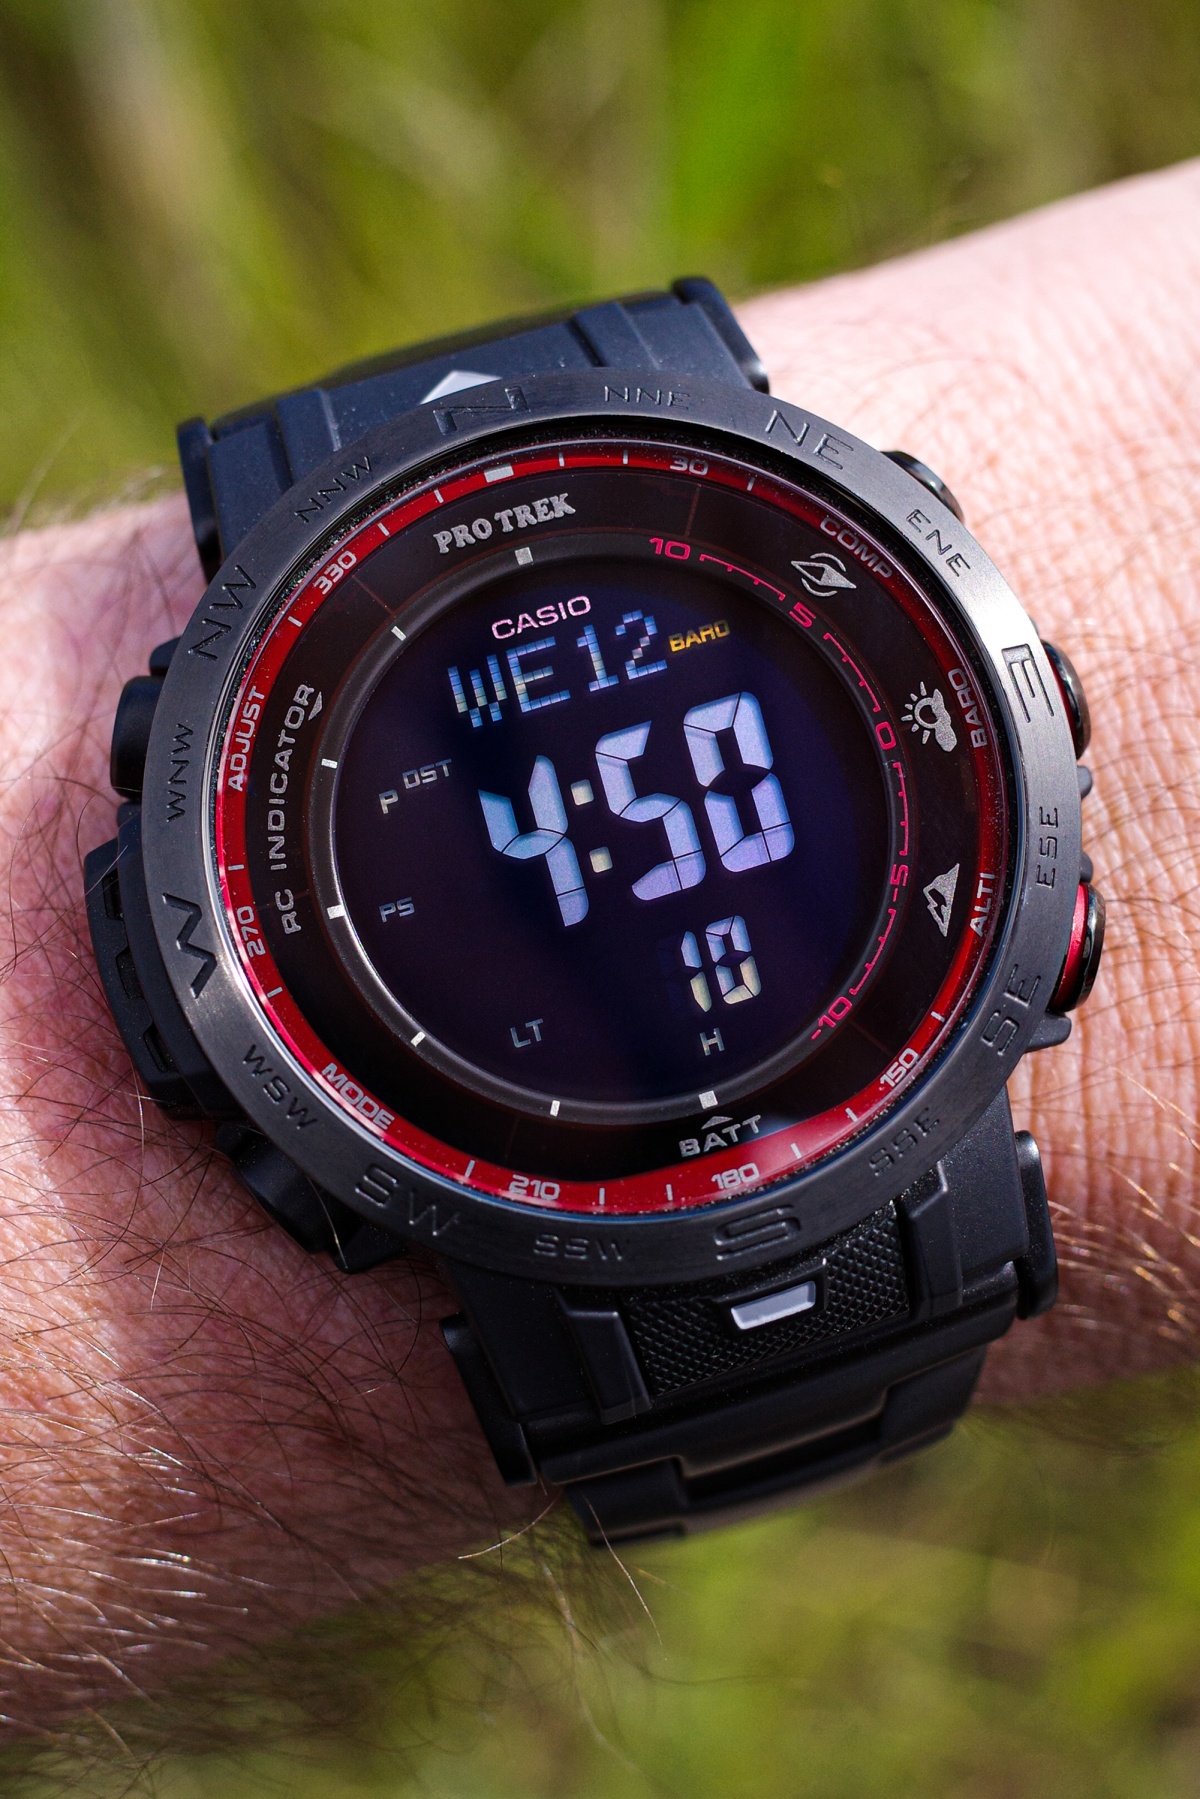 Casio Pro-Trek PRW-30 Firefall Edition Review – The Best Digital Watch in the World